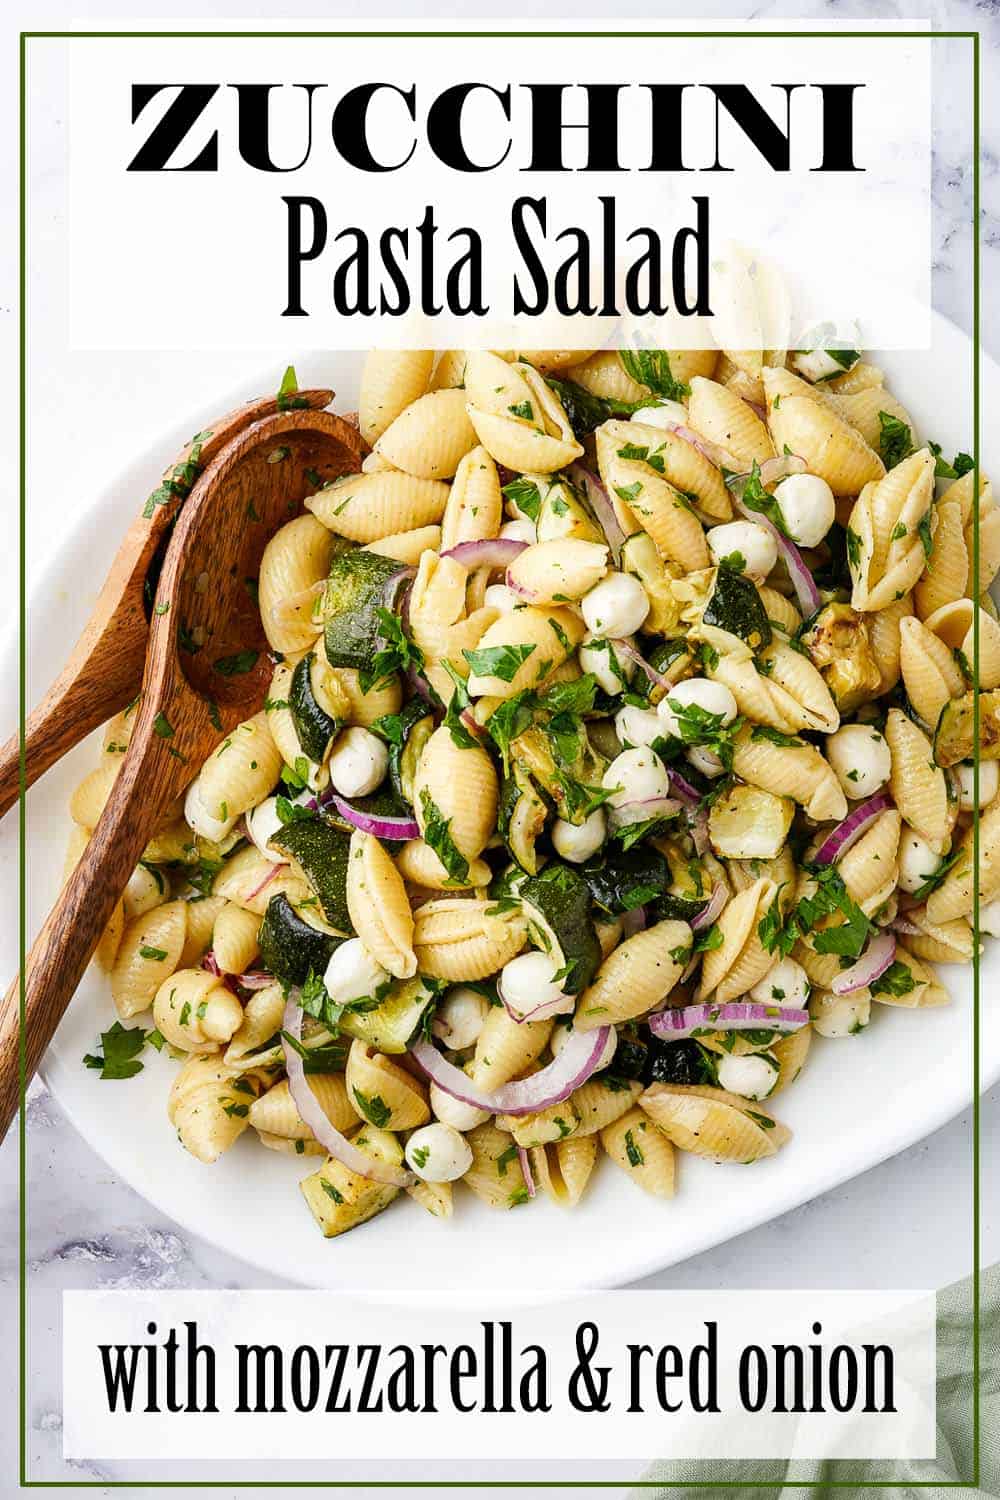 Zucchini Pasta Salad on White Platter with 2 Wooden Spoons